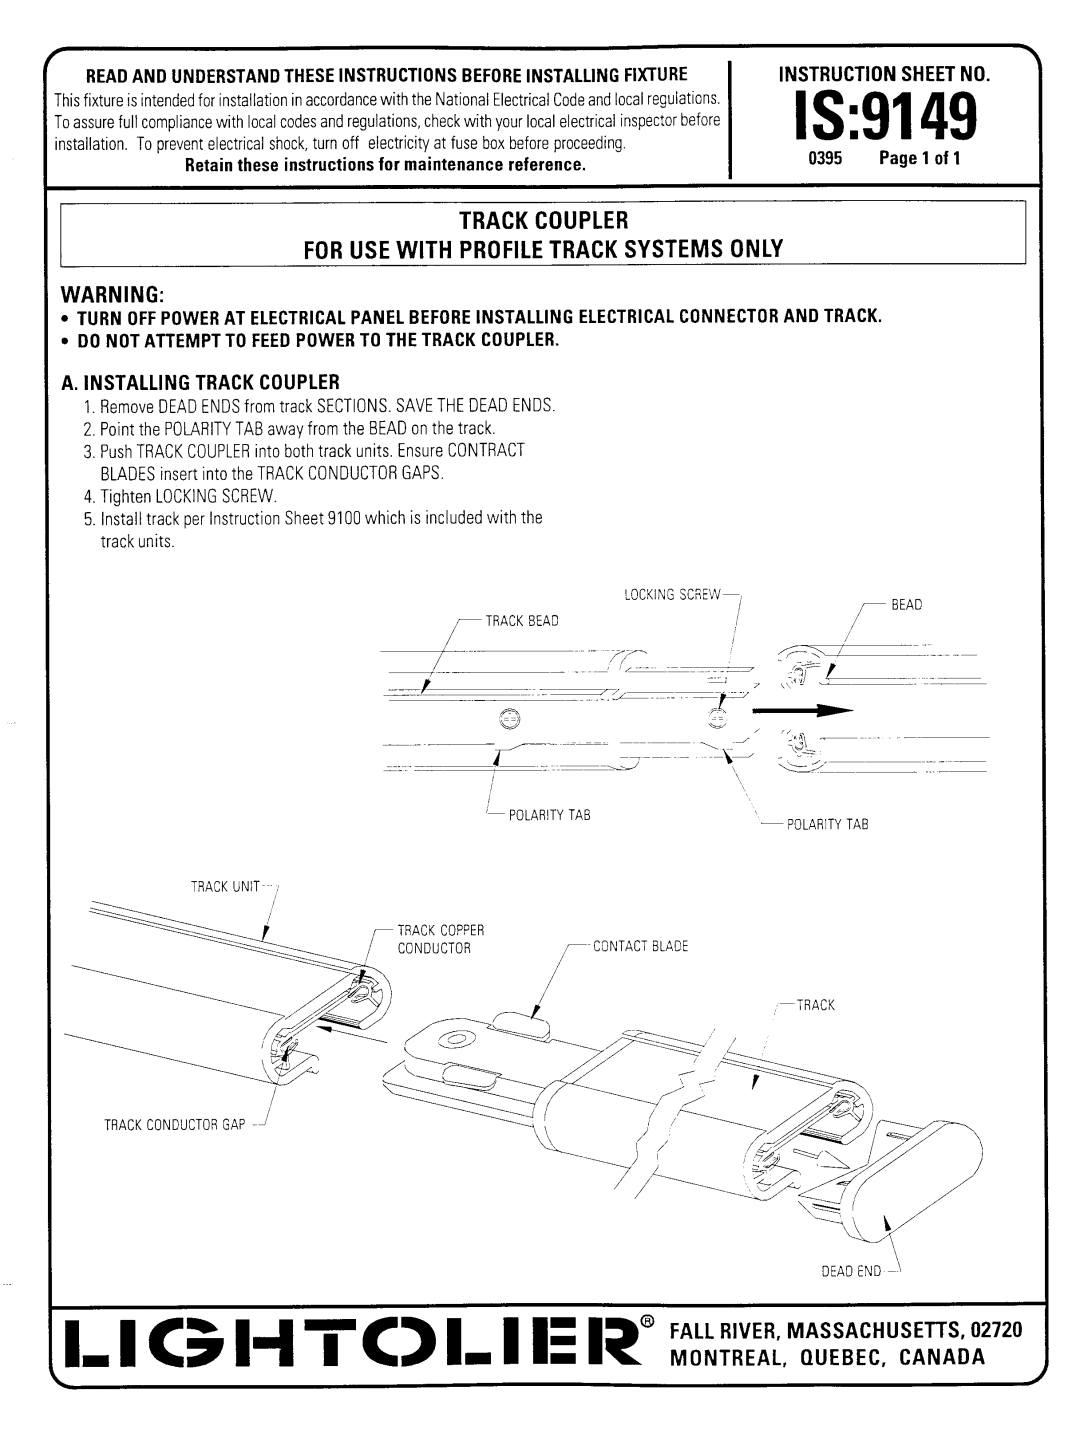 Lightolier 9149 instruction sheet Is, Trackcoupler, For Use With Profile Track Systems Only, A.Installing Track Coupler 